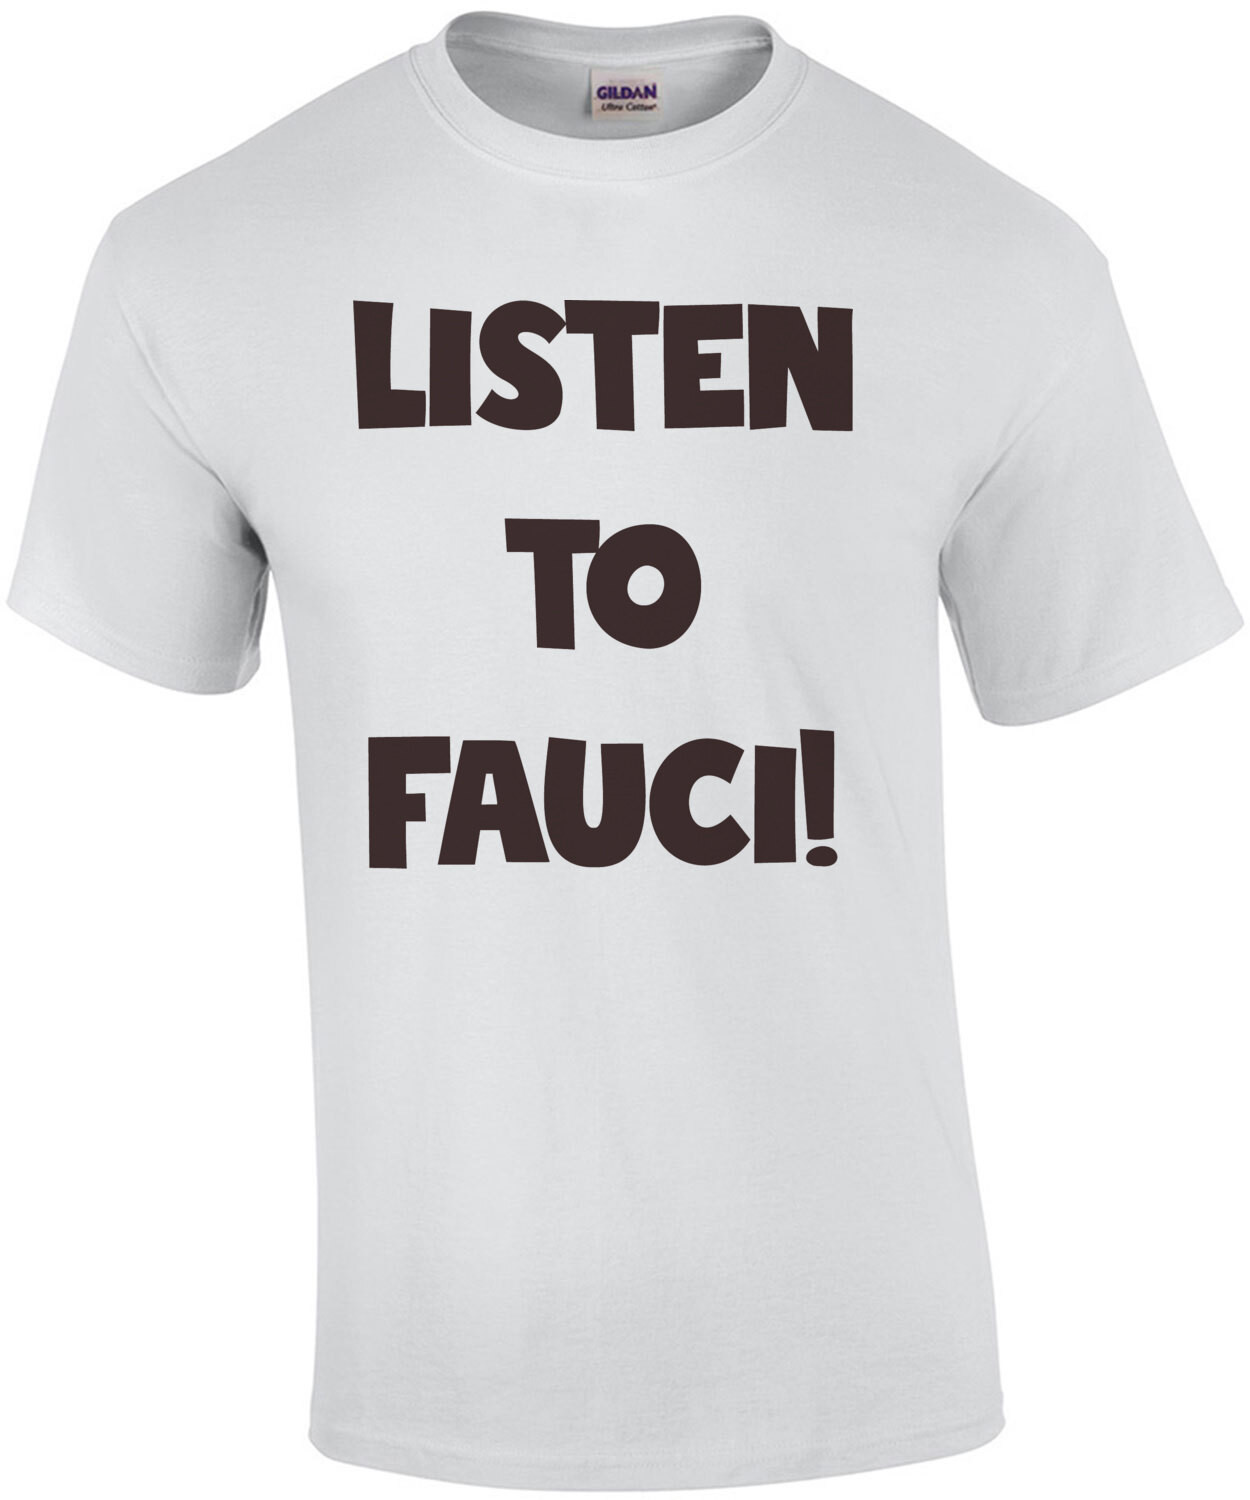 Listen to Fauci Funny Covid Shirt